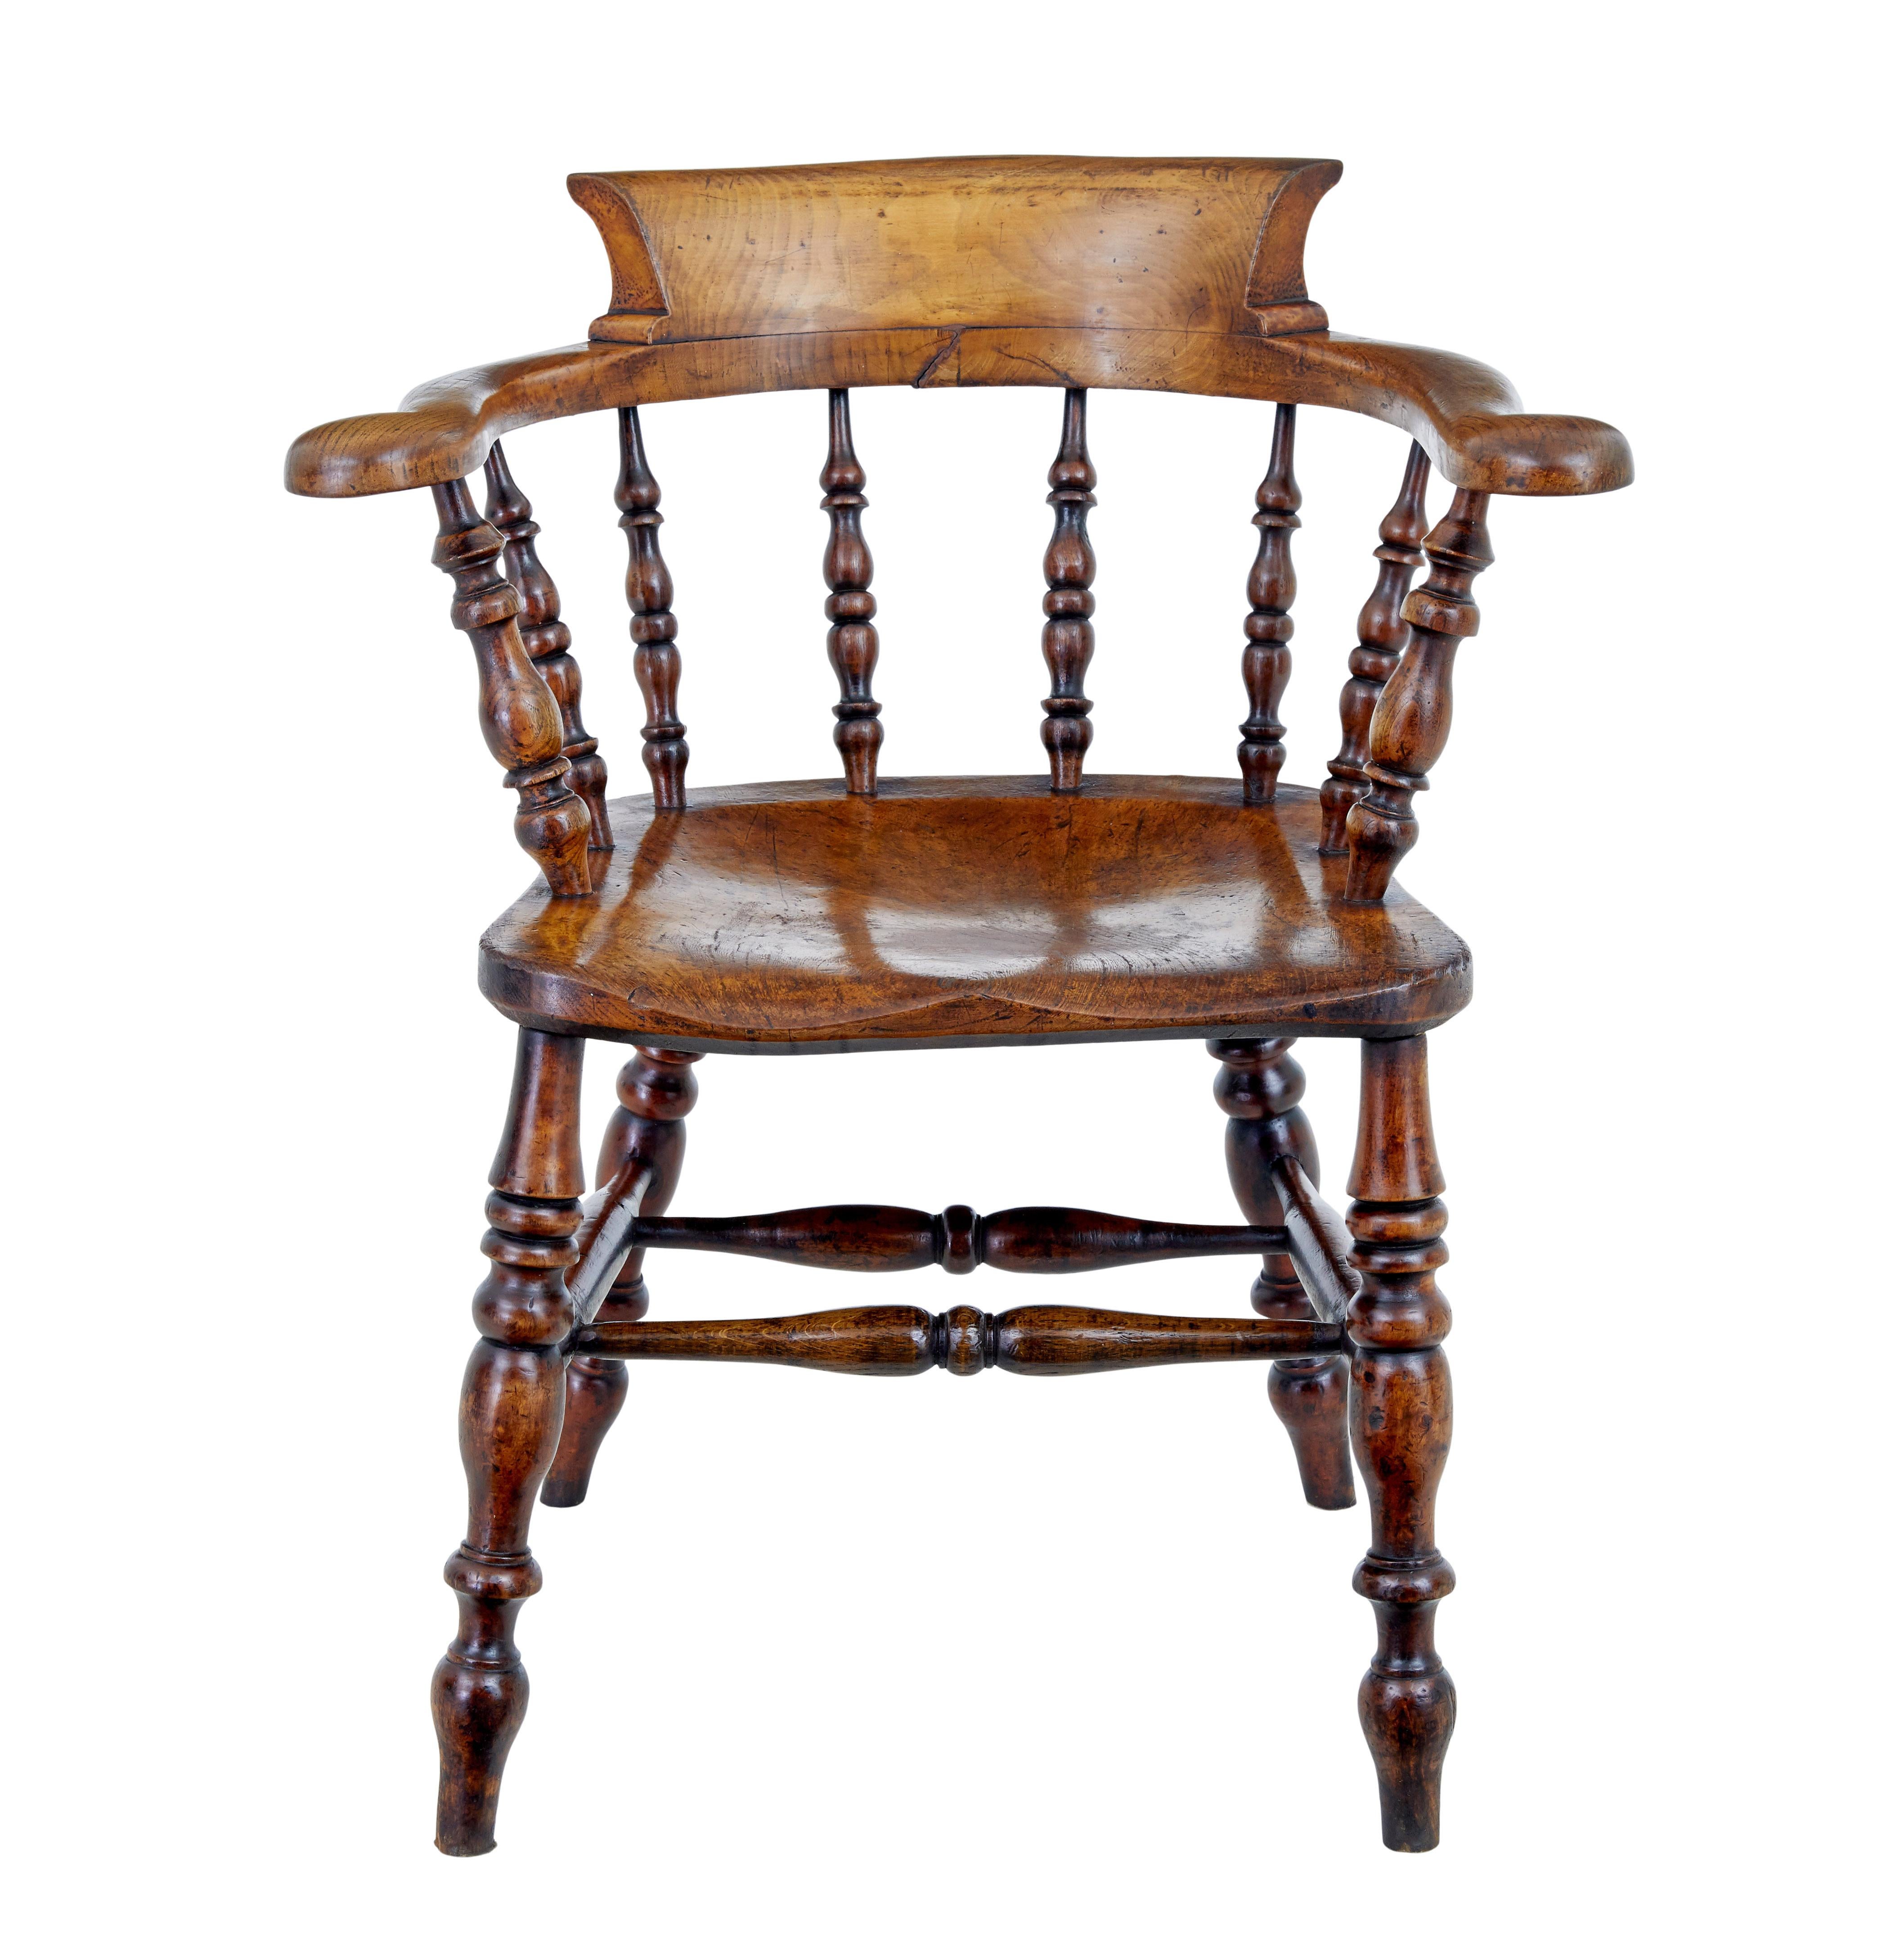 Mid 19th century elm captains armchair circa 1860.

Good quality character armchair made from solid elm.  Shaped back and arm linked with turned spindles to the seat.  Turned legs united by stretcher.

Obvious surface marks and natural movement to